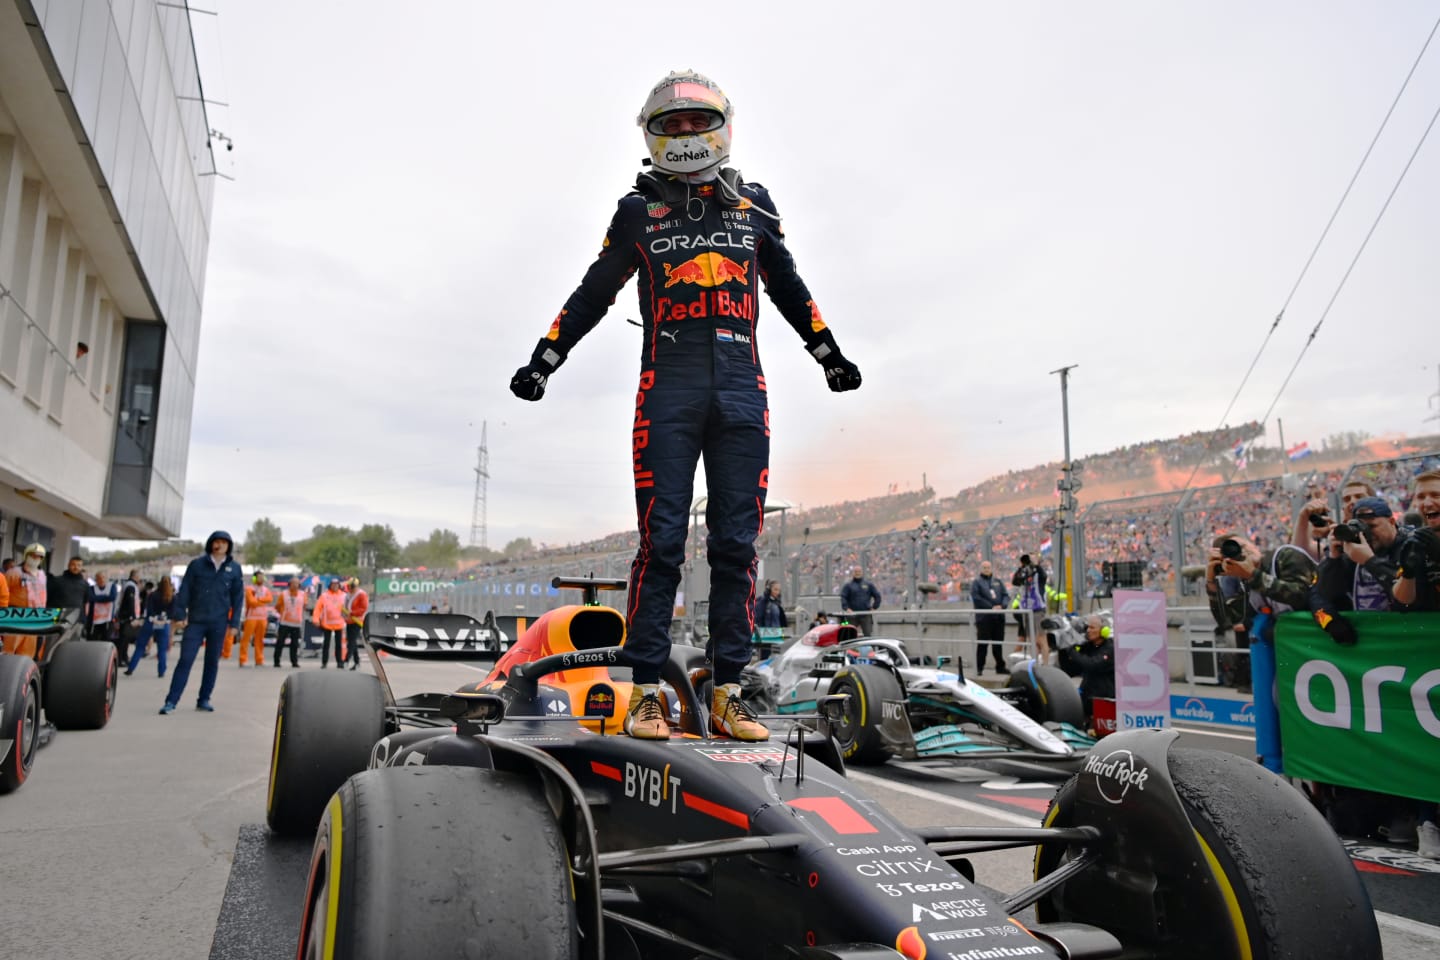 BUDAPEST, HUNGARY - JULY 31: Race winner Max Verstappen of the Netherlands and Oracle Red Bull Racing celebrates in parc ferme during the F1 Grand Prix of Hungary at Hungaroring on July 31, 2022 in Budapest, Hungary. (Photo by Dan Mullan/Getty Images)